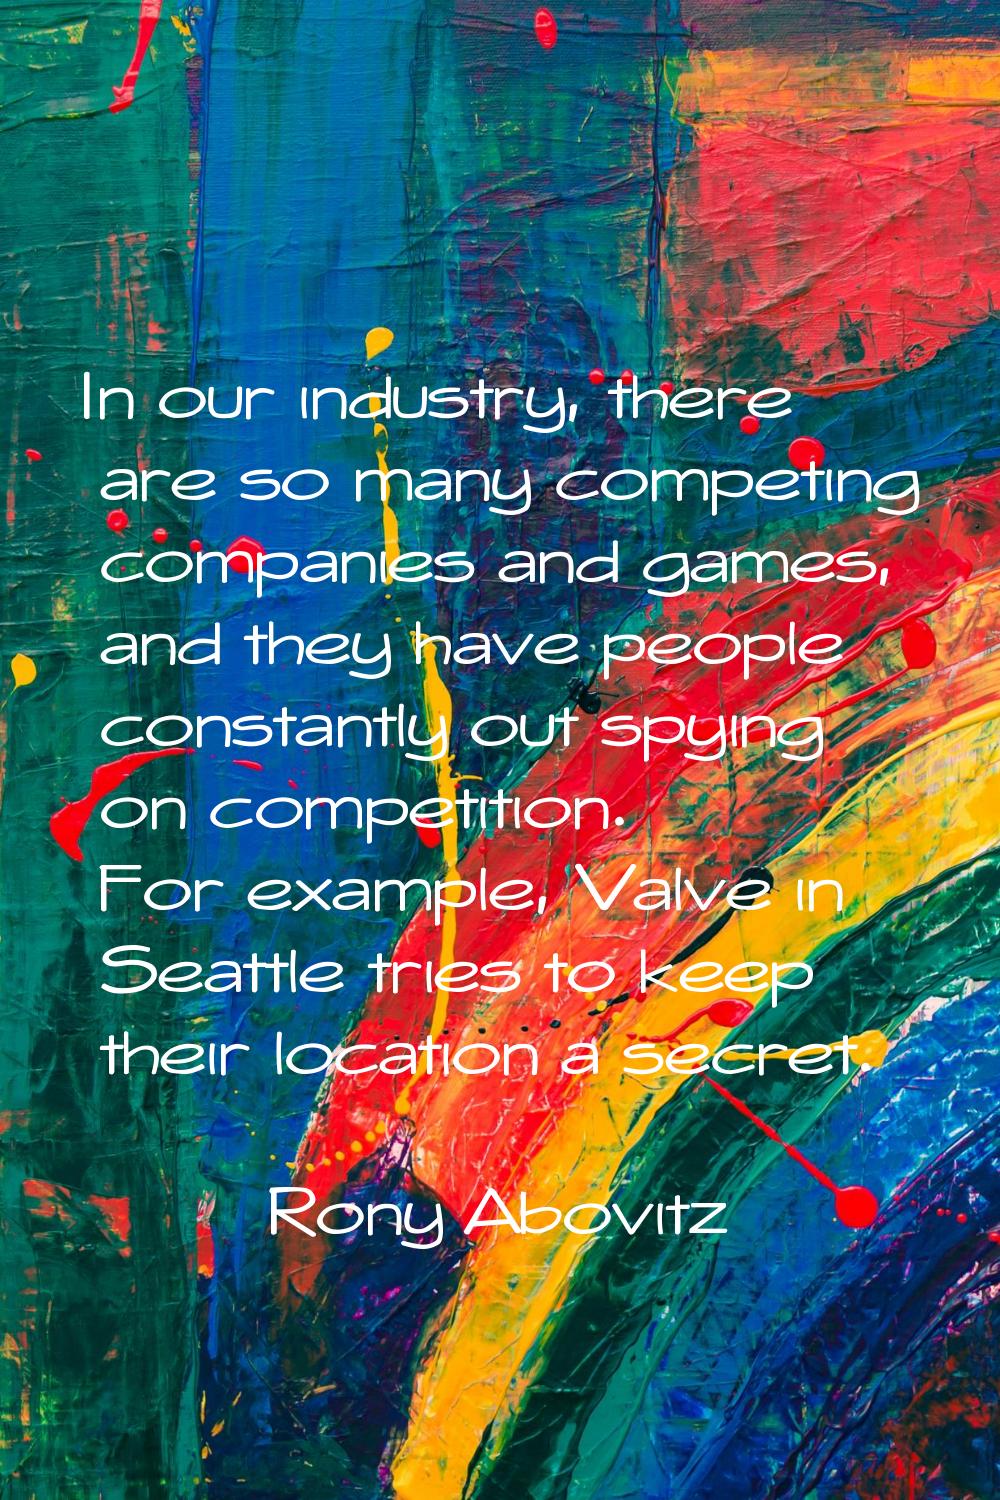 In our industry, there are so many competing companies and games, and they have people constantly o